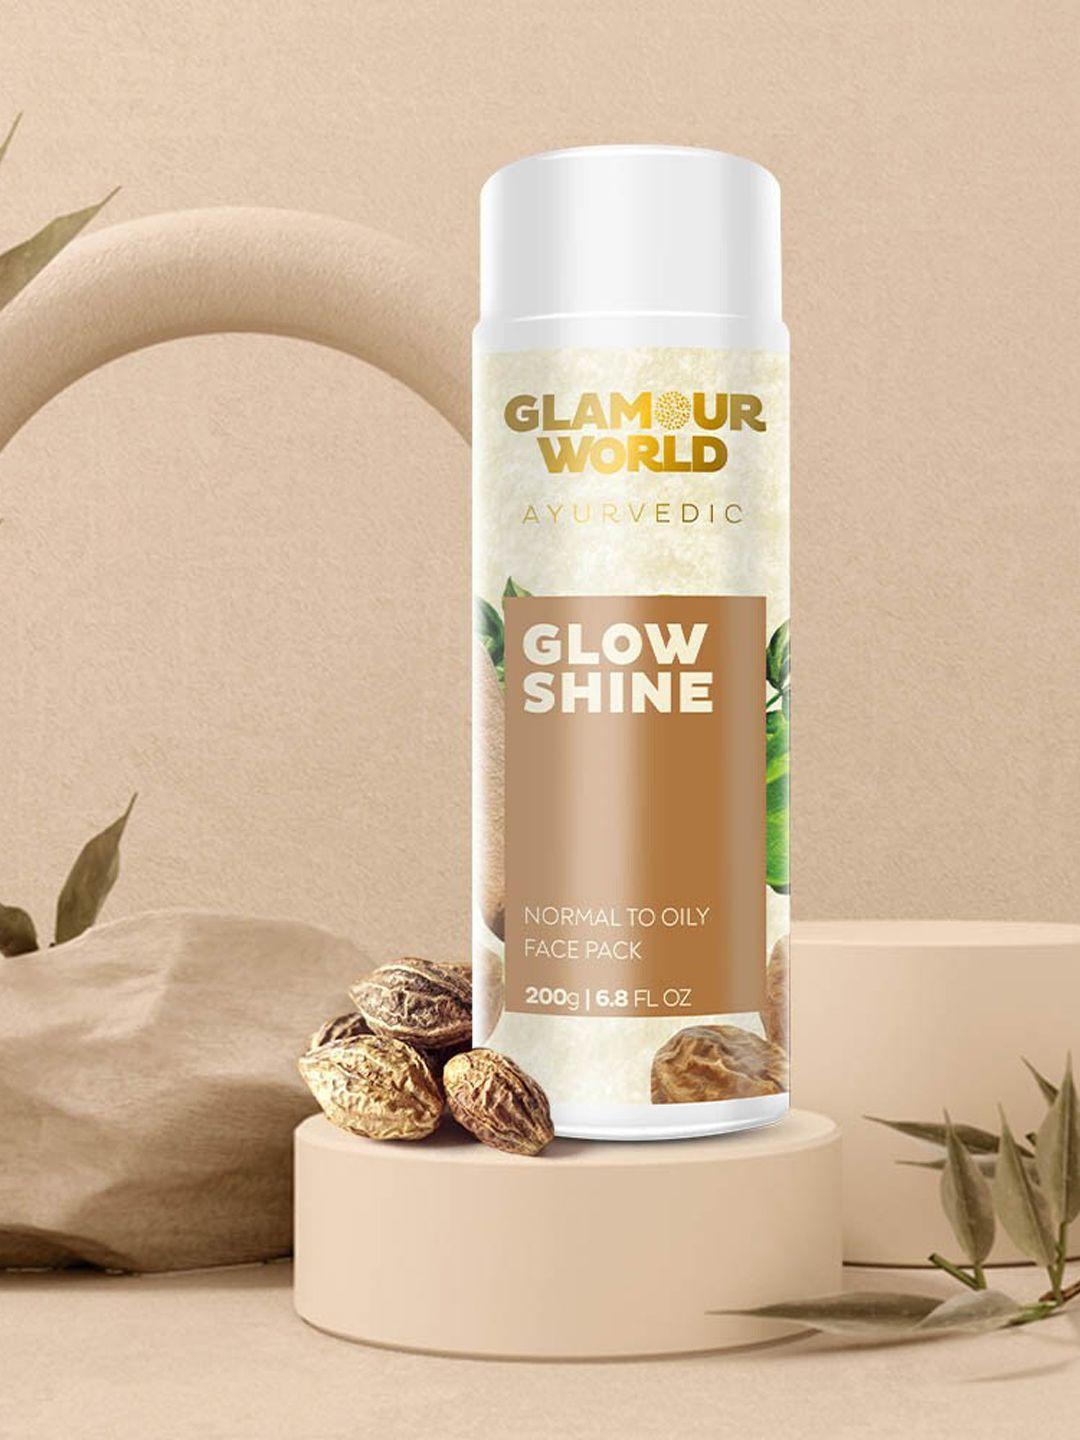 glamour world ayurvedic glow shine face pack for normal to oily skin - 200g